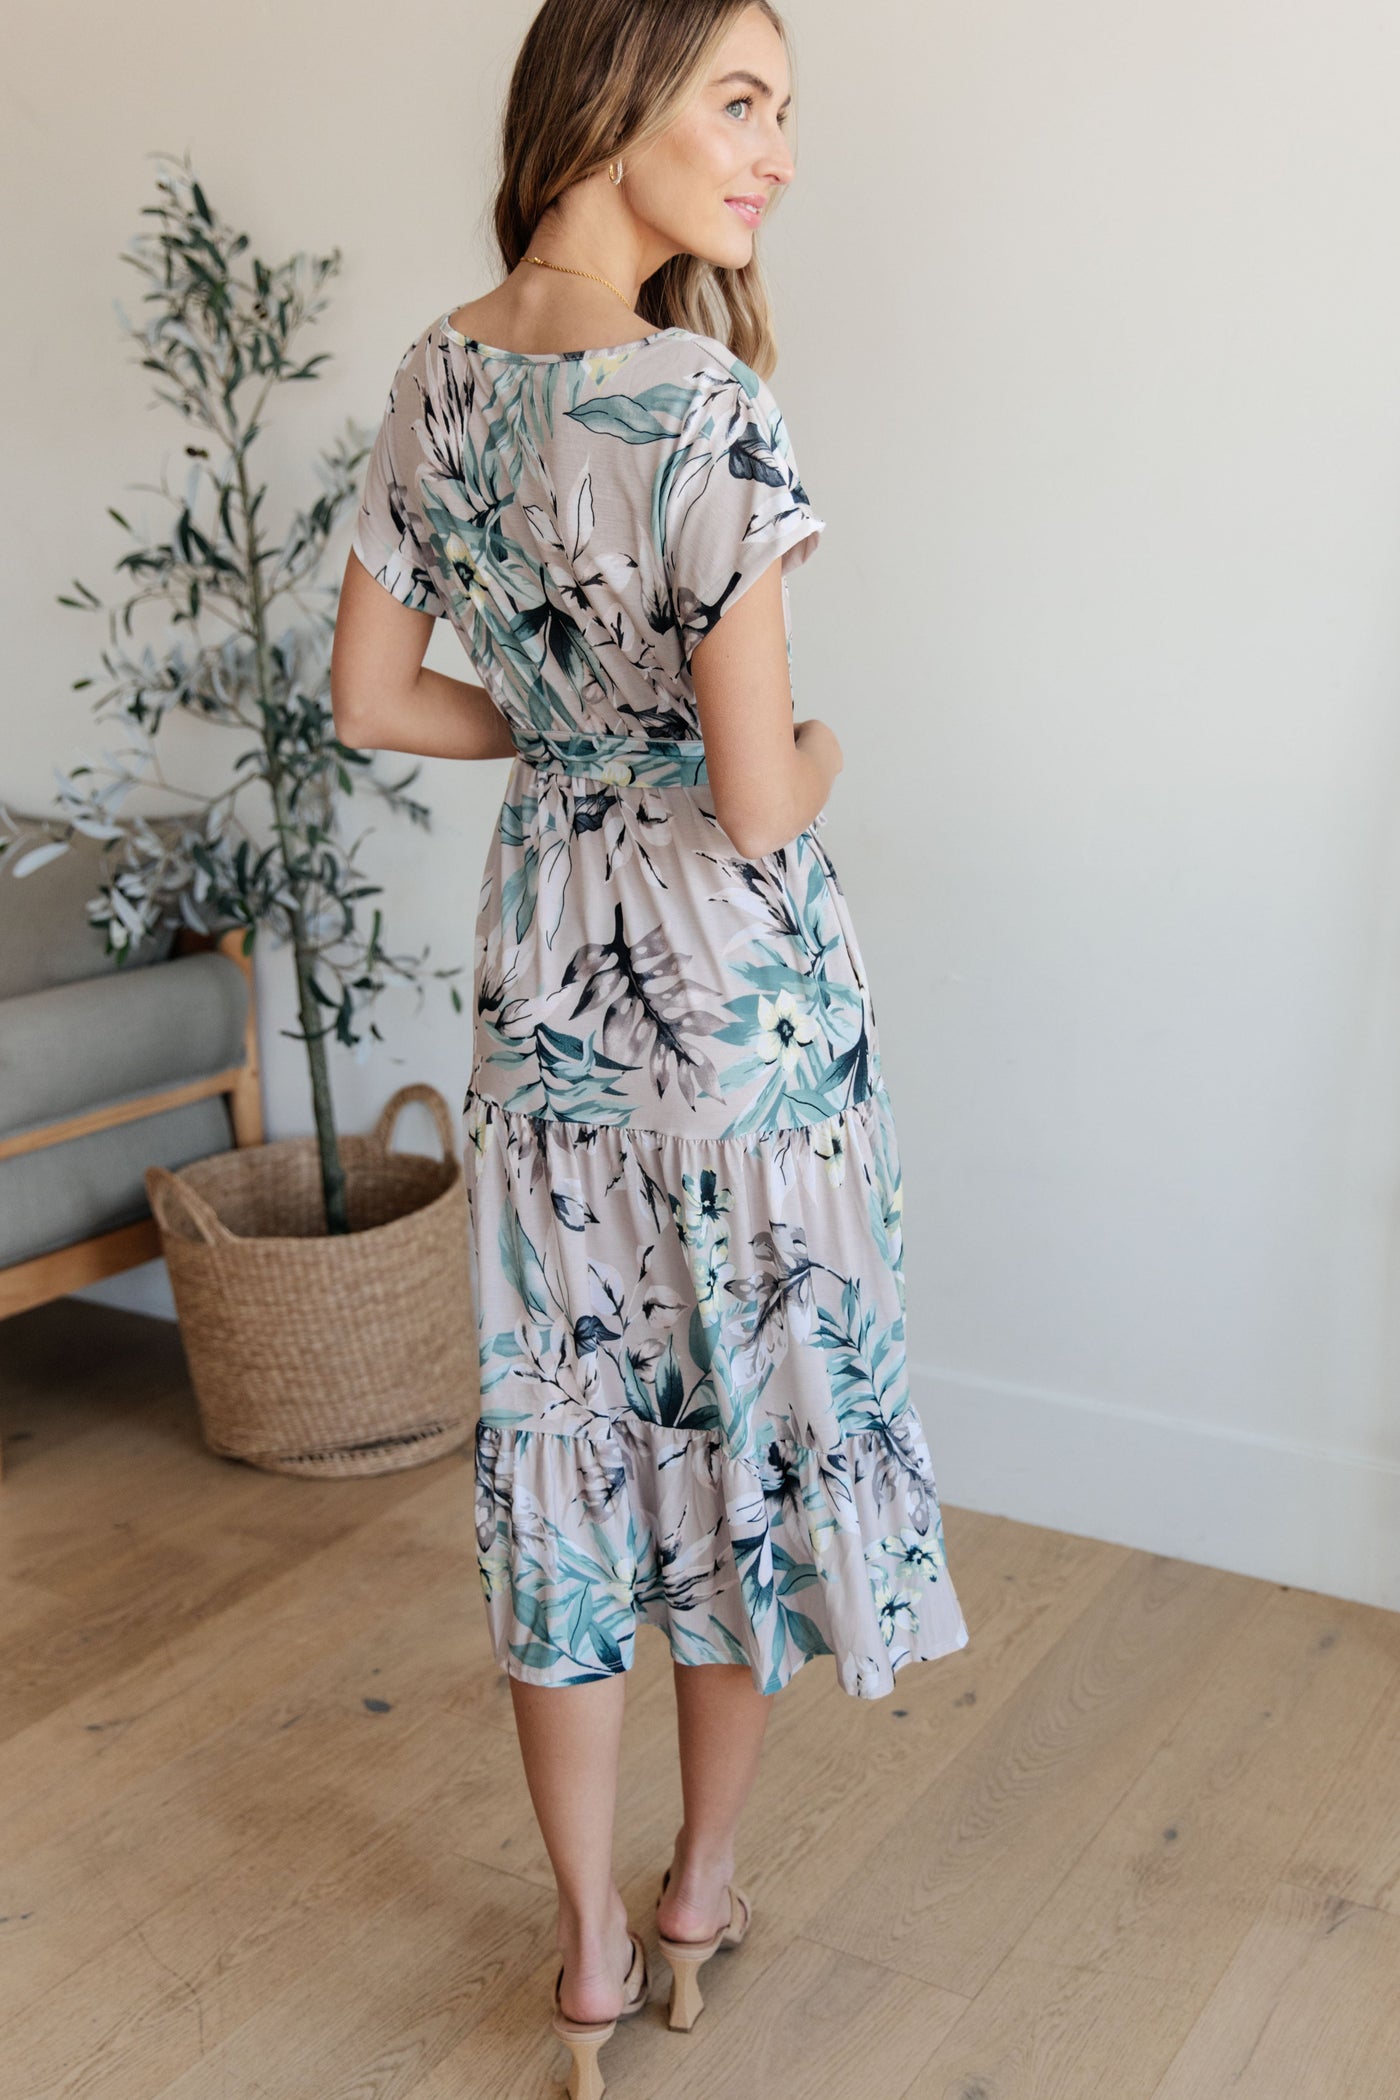 Into the Night Dolman Sleeve Floral Dress Southern Soul Collectives